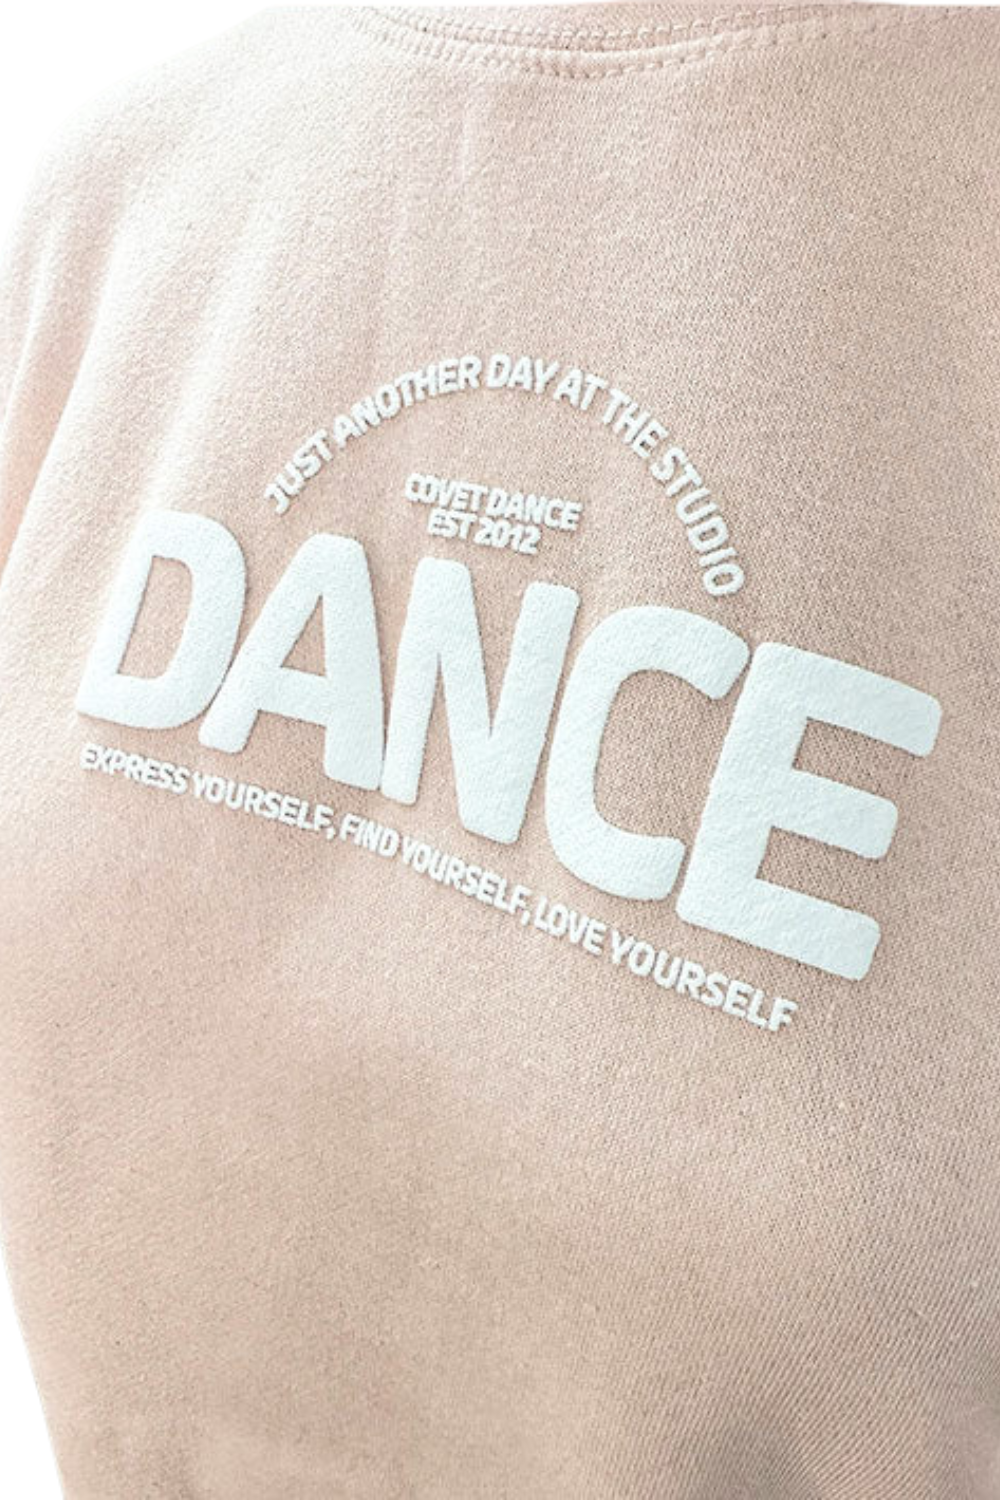 COVET DANCE JADD-SS ADULT JUST ANOTHER DAY AT THE STUDIO SWEATSHIRT